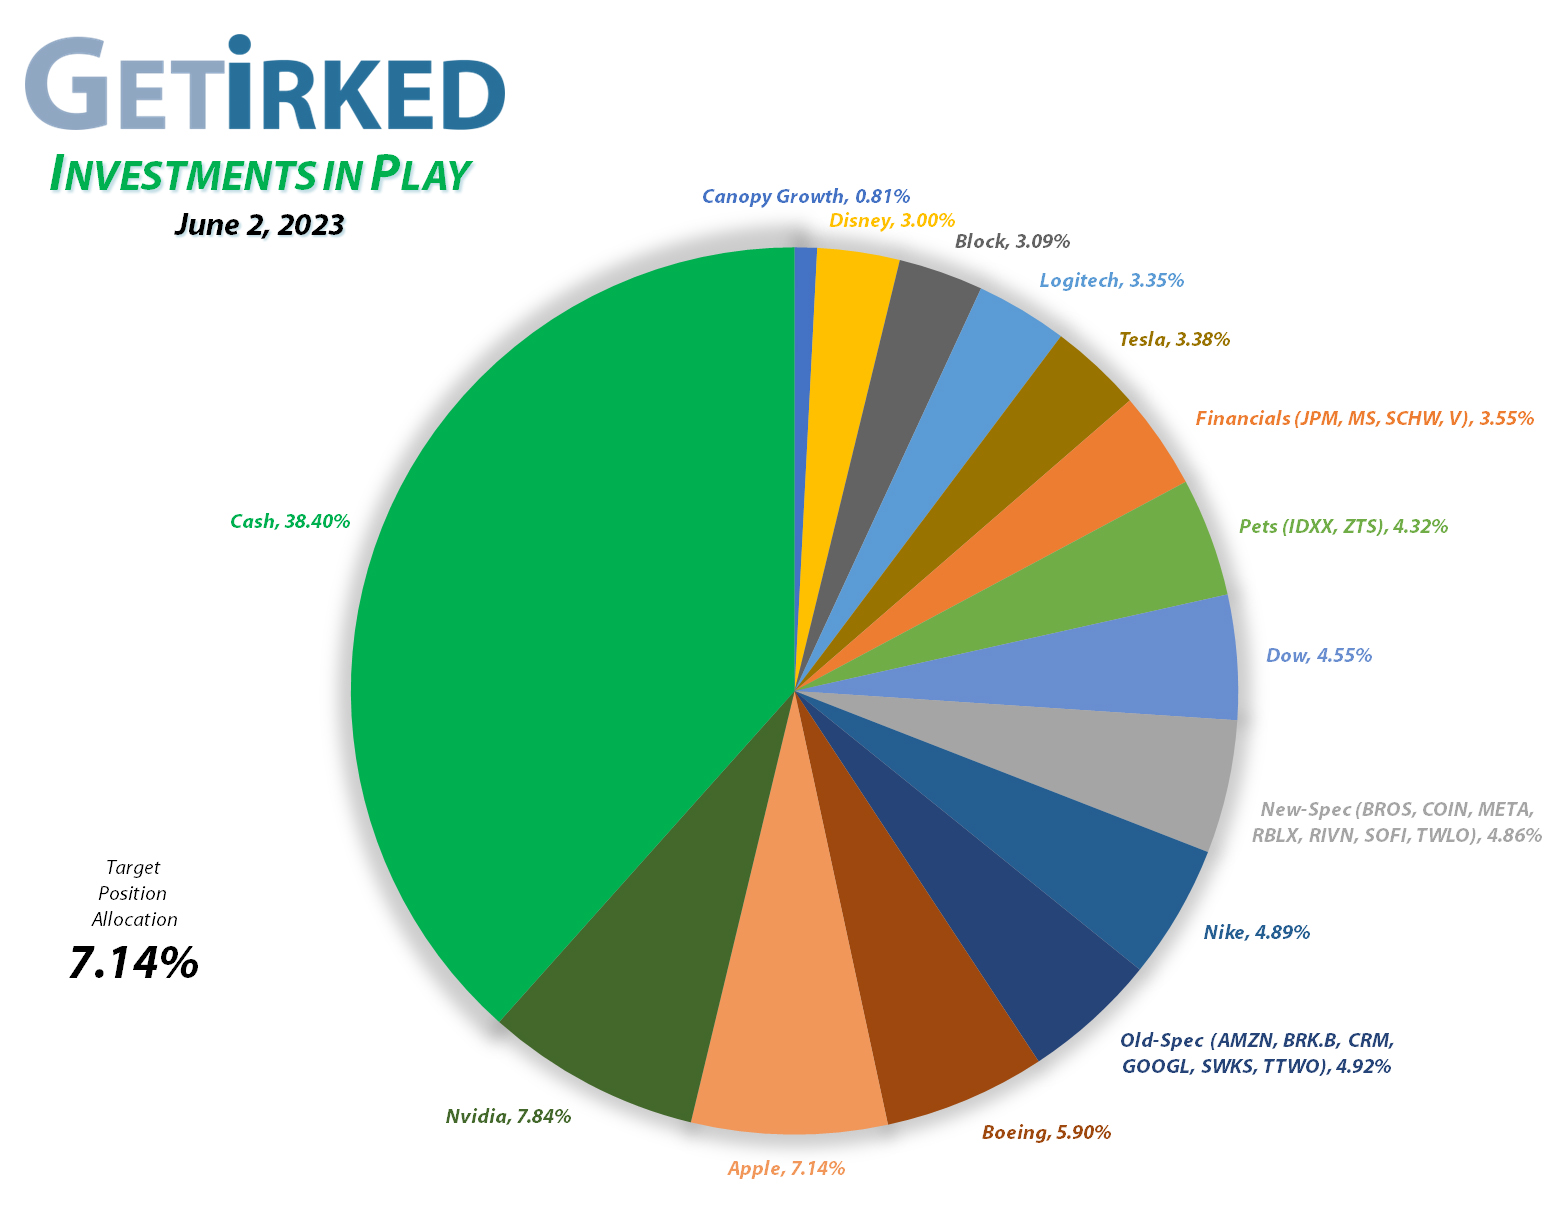 Get Irked - Investments in Play - Current Holdings - June 2, 2023